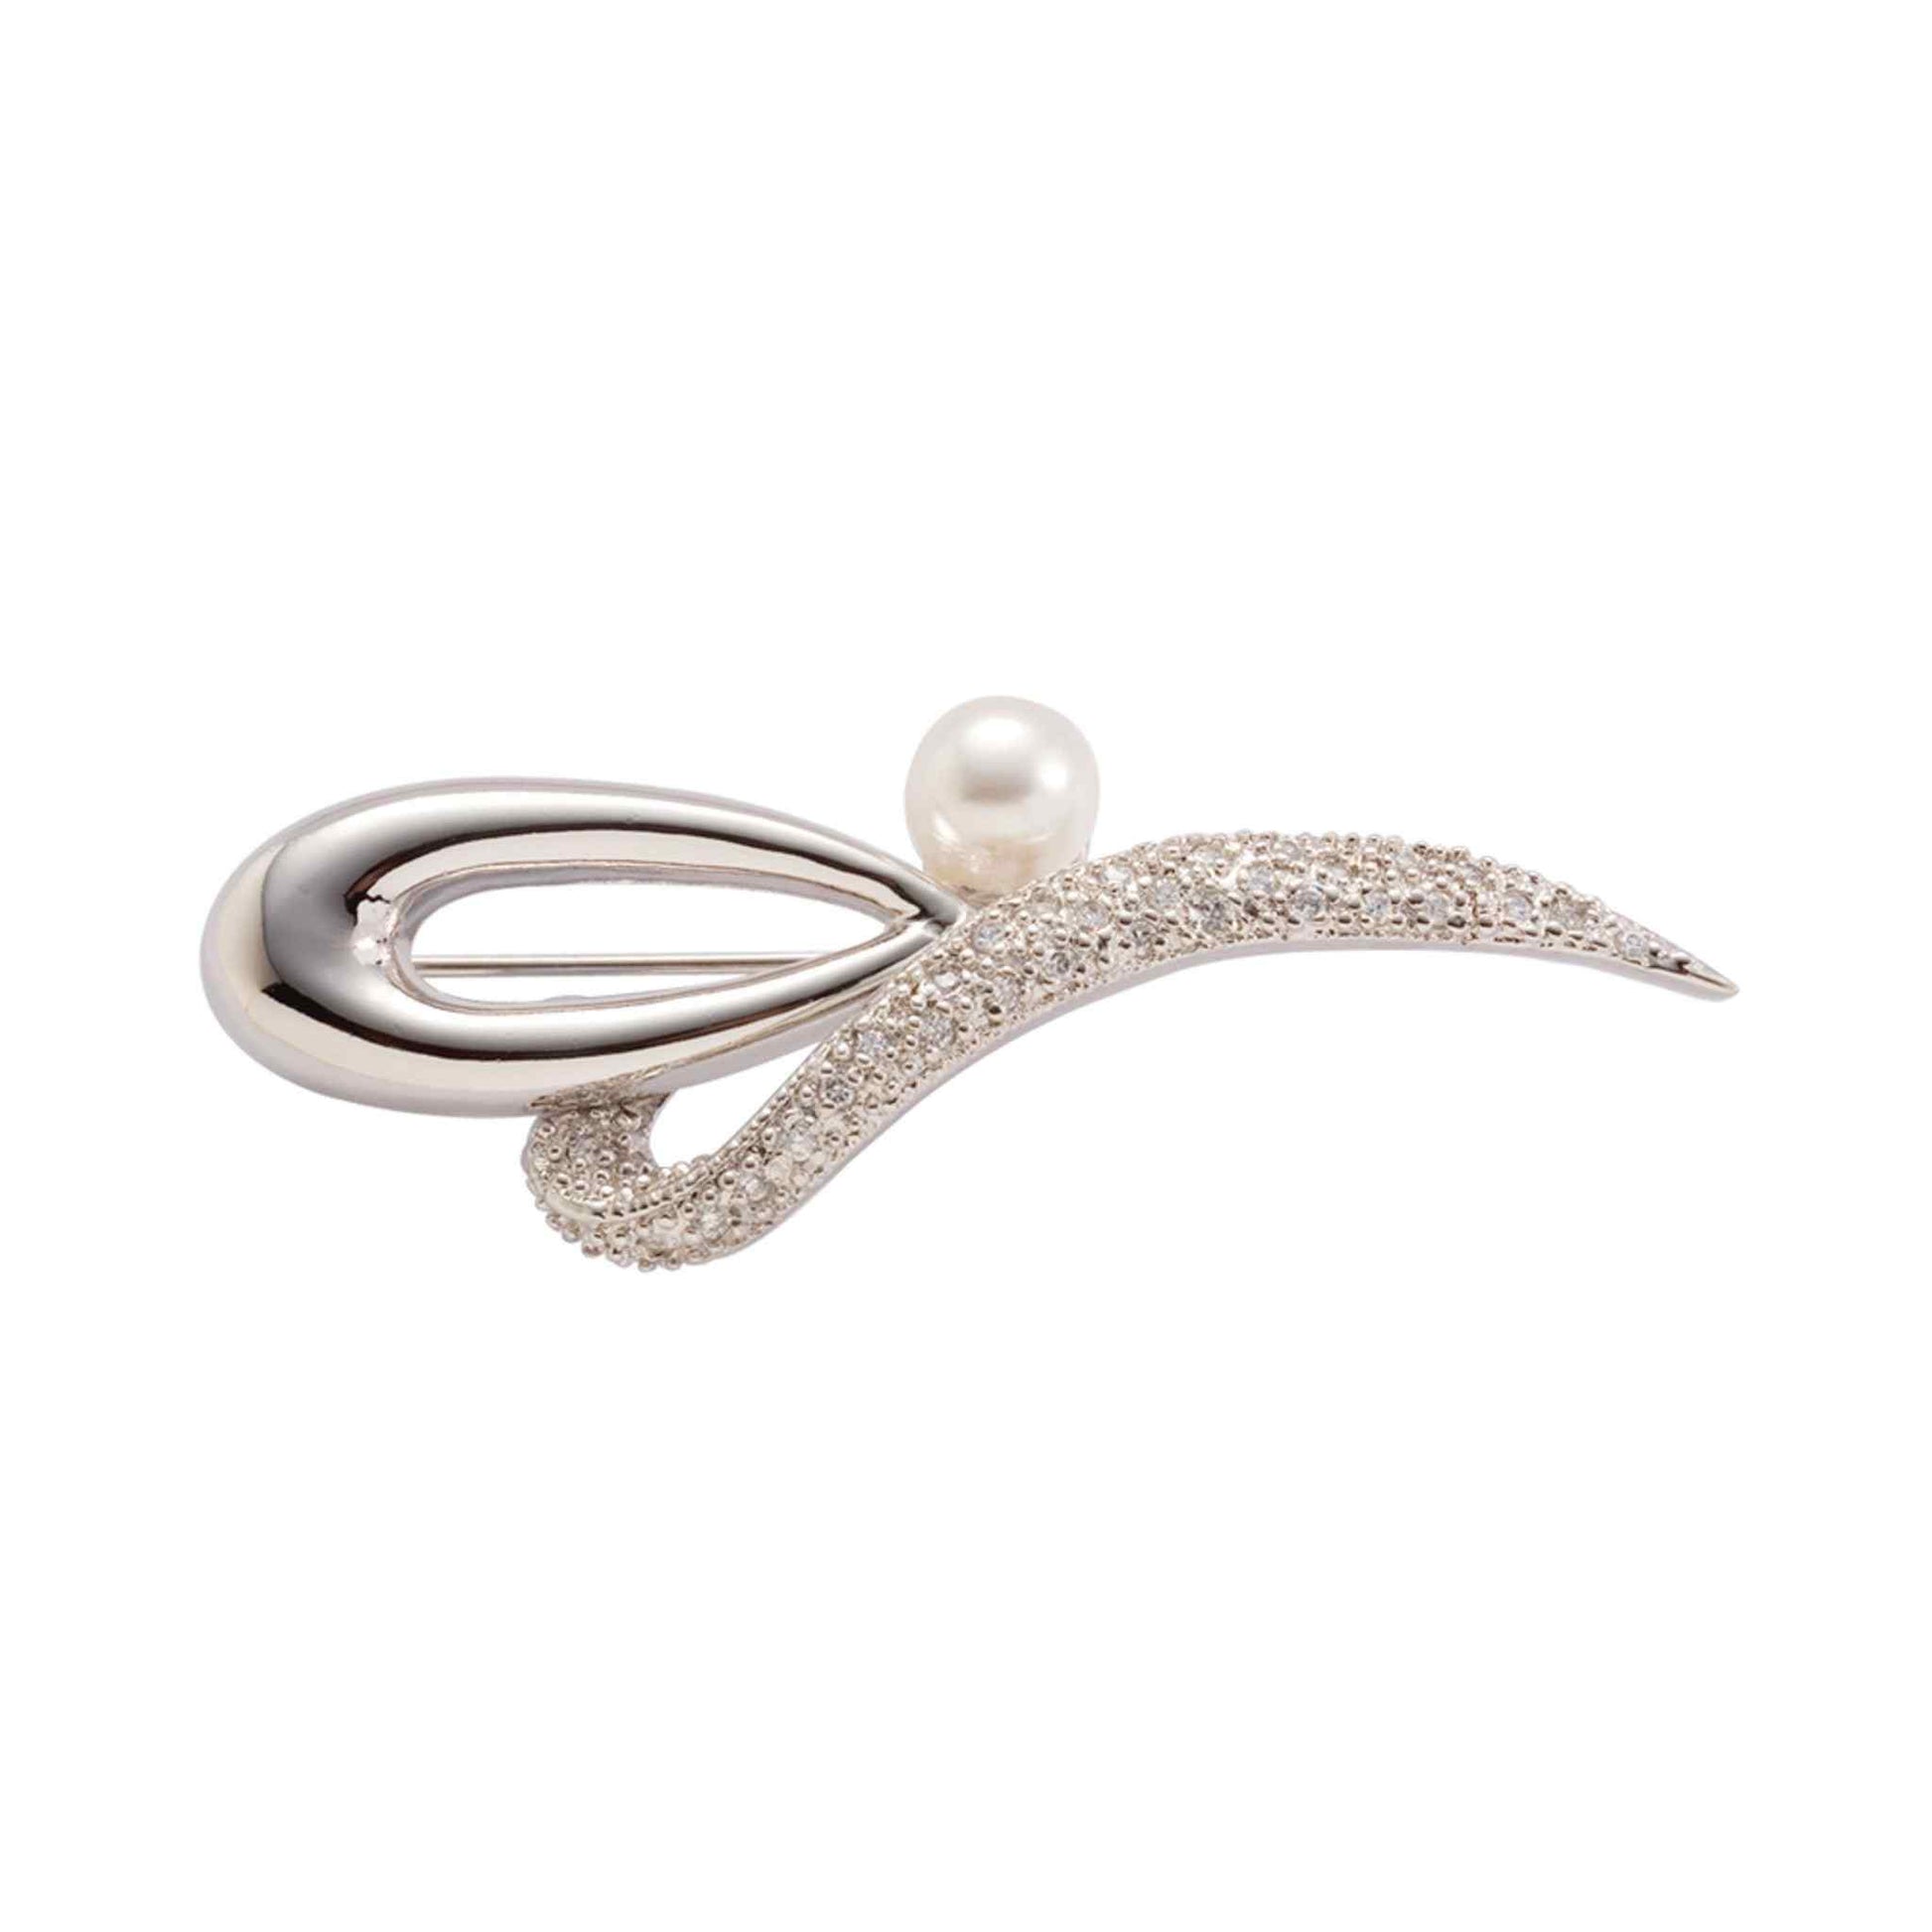 A ornate glass pearl pin displayed on a neutral white background.